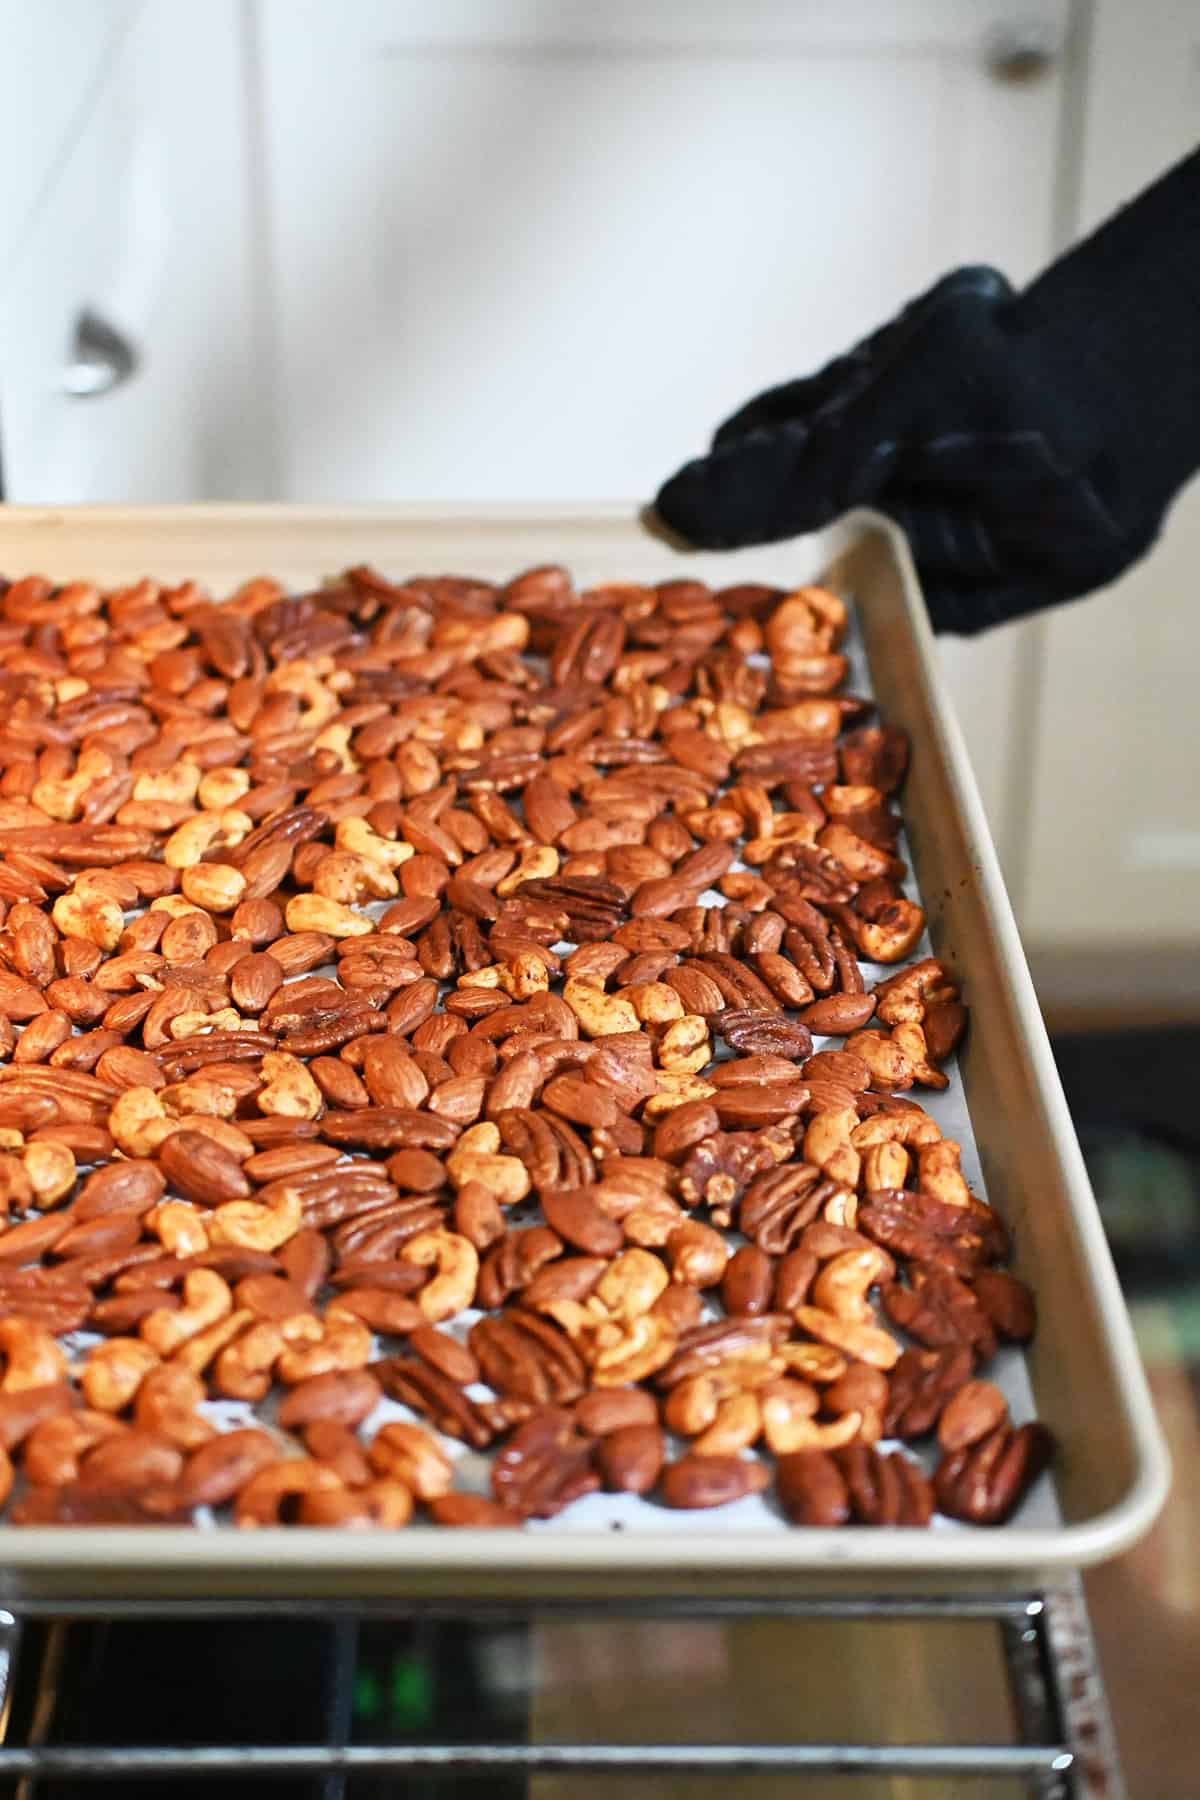 Removing a rimmed baking sheet of freshly roasted spice nuts out of an oven.